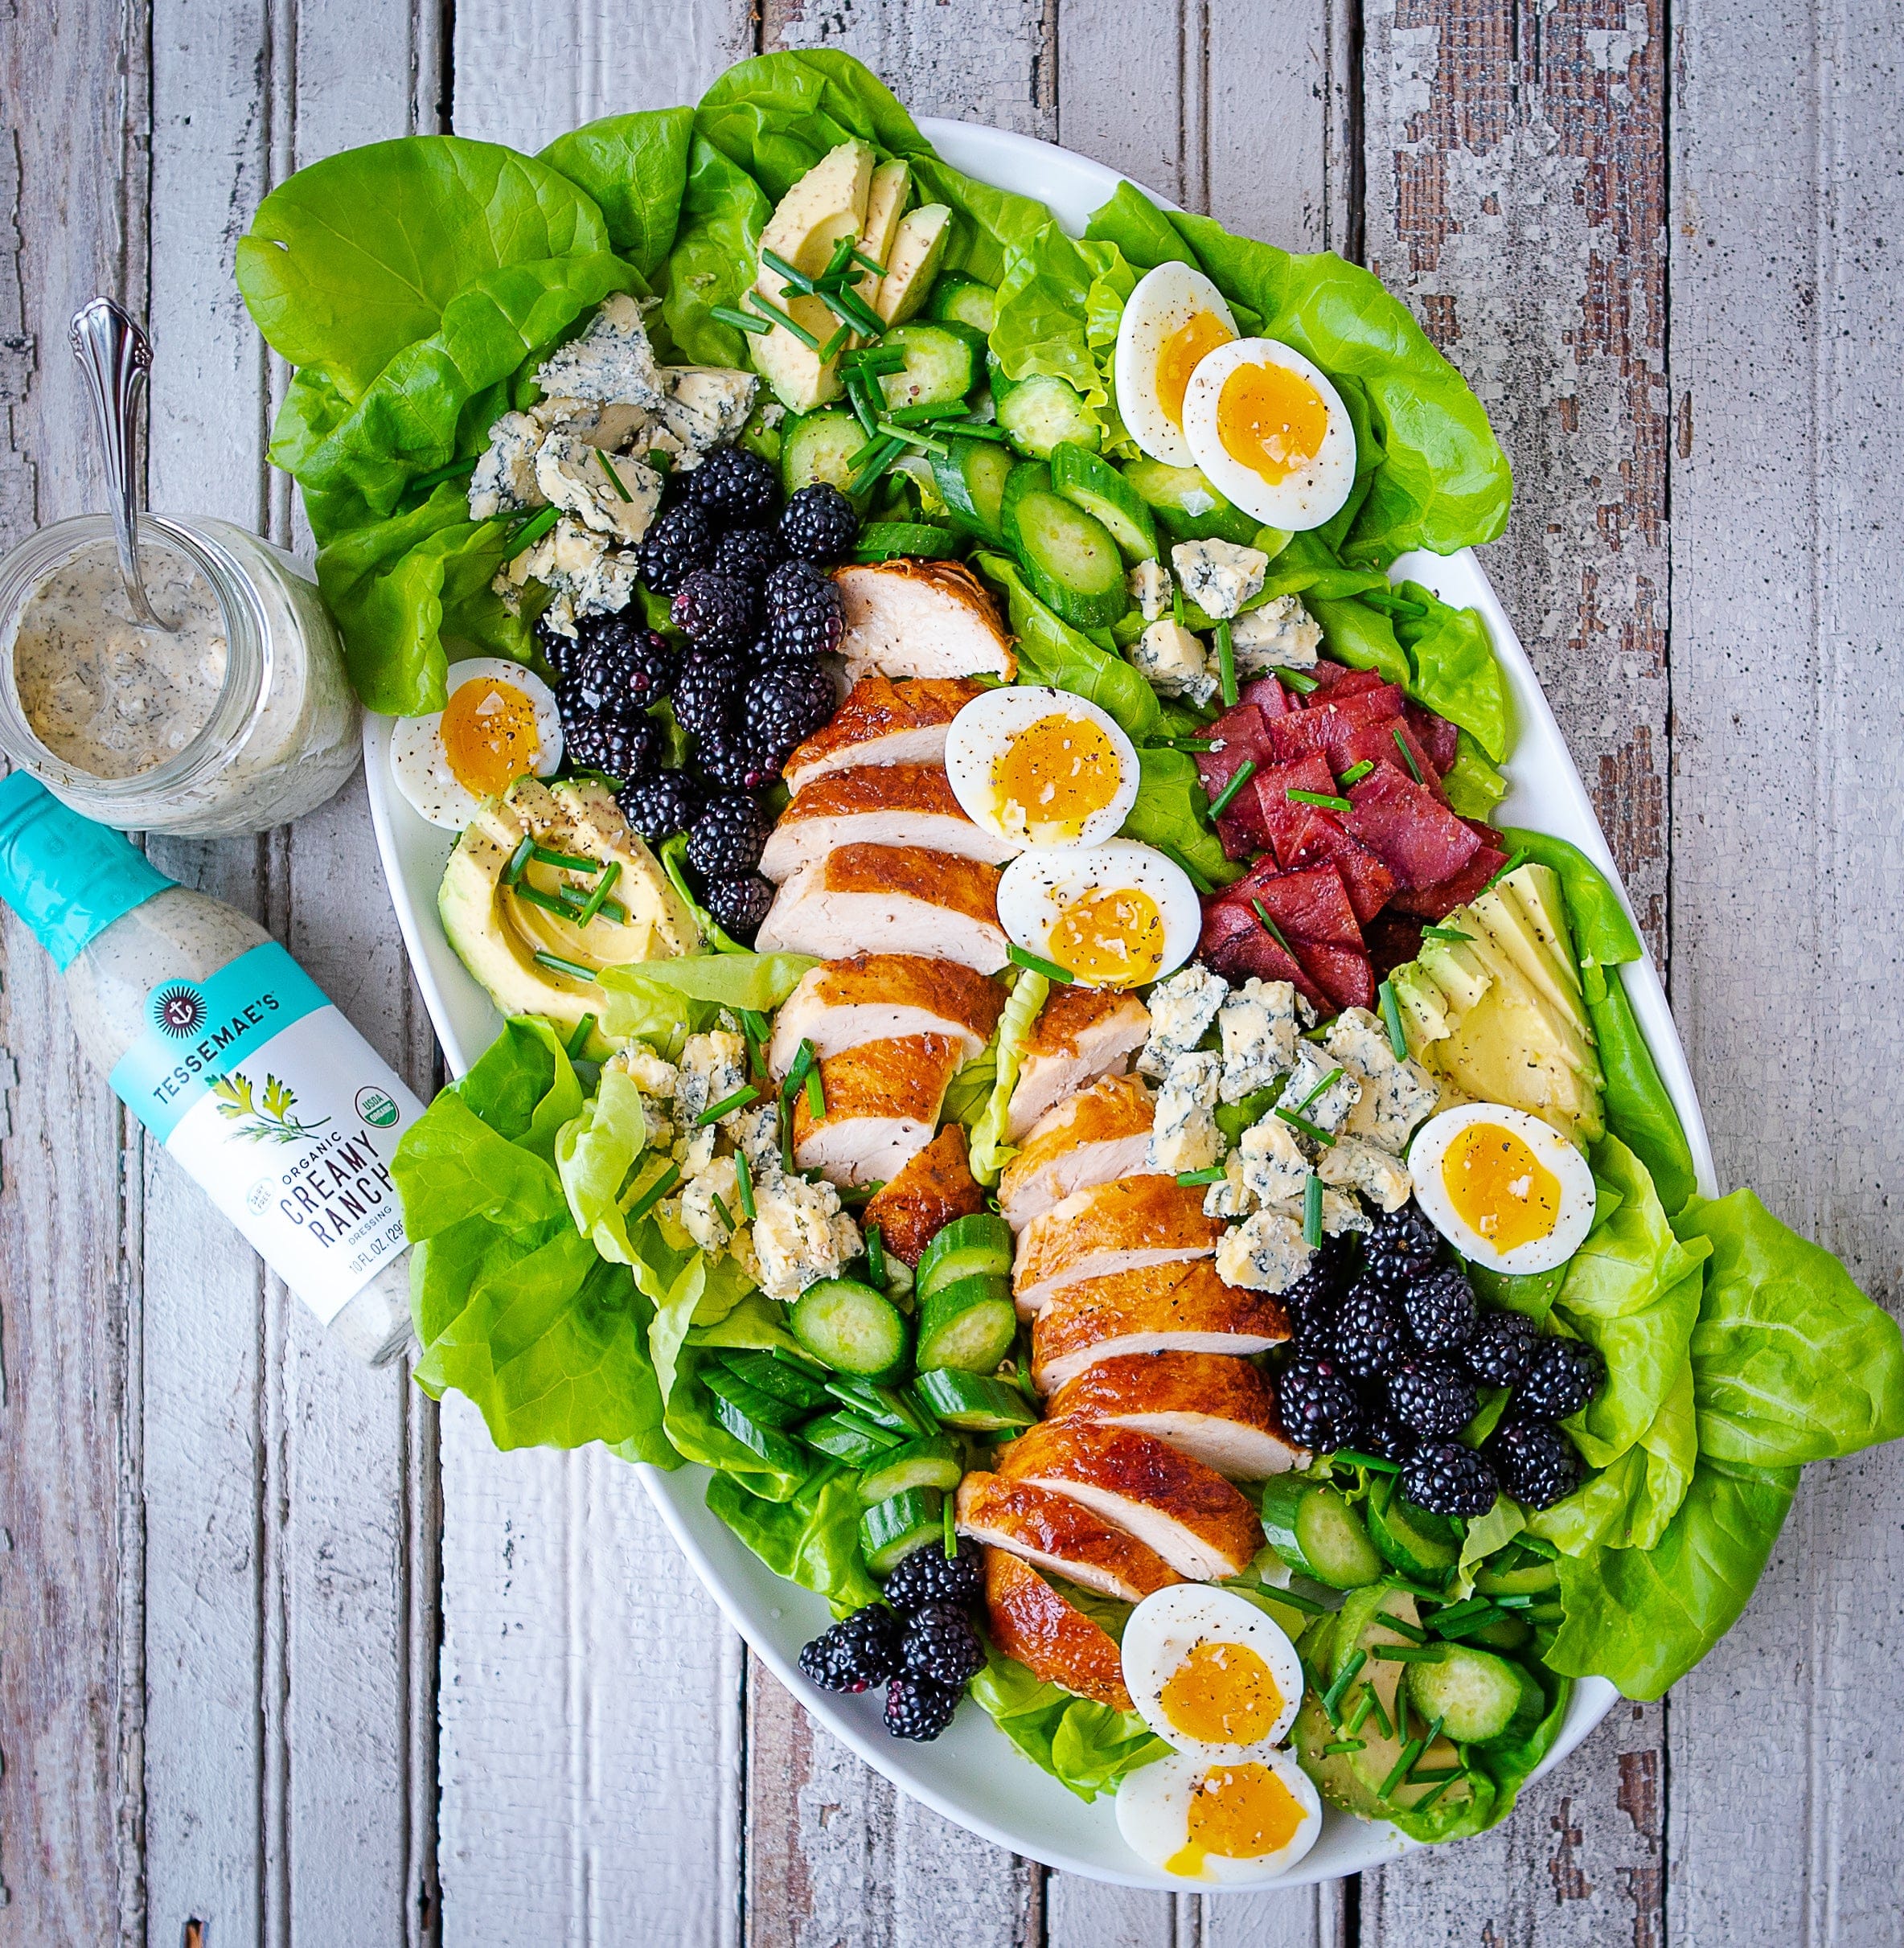 Blackberry Cobb Salad with Blue Cheese Dressing